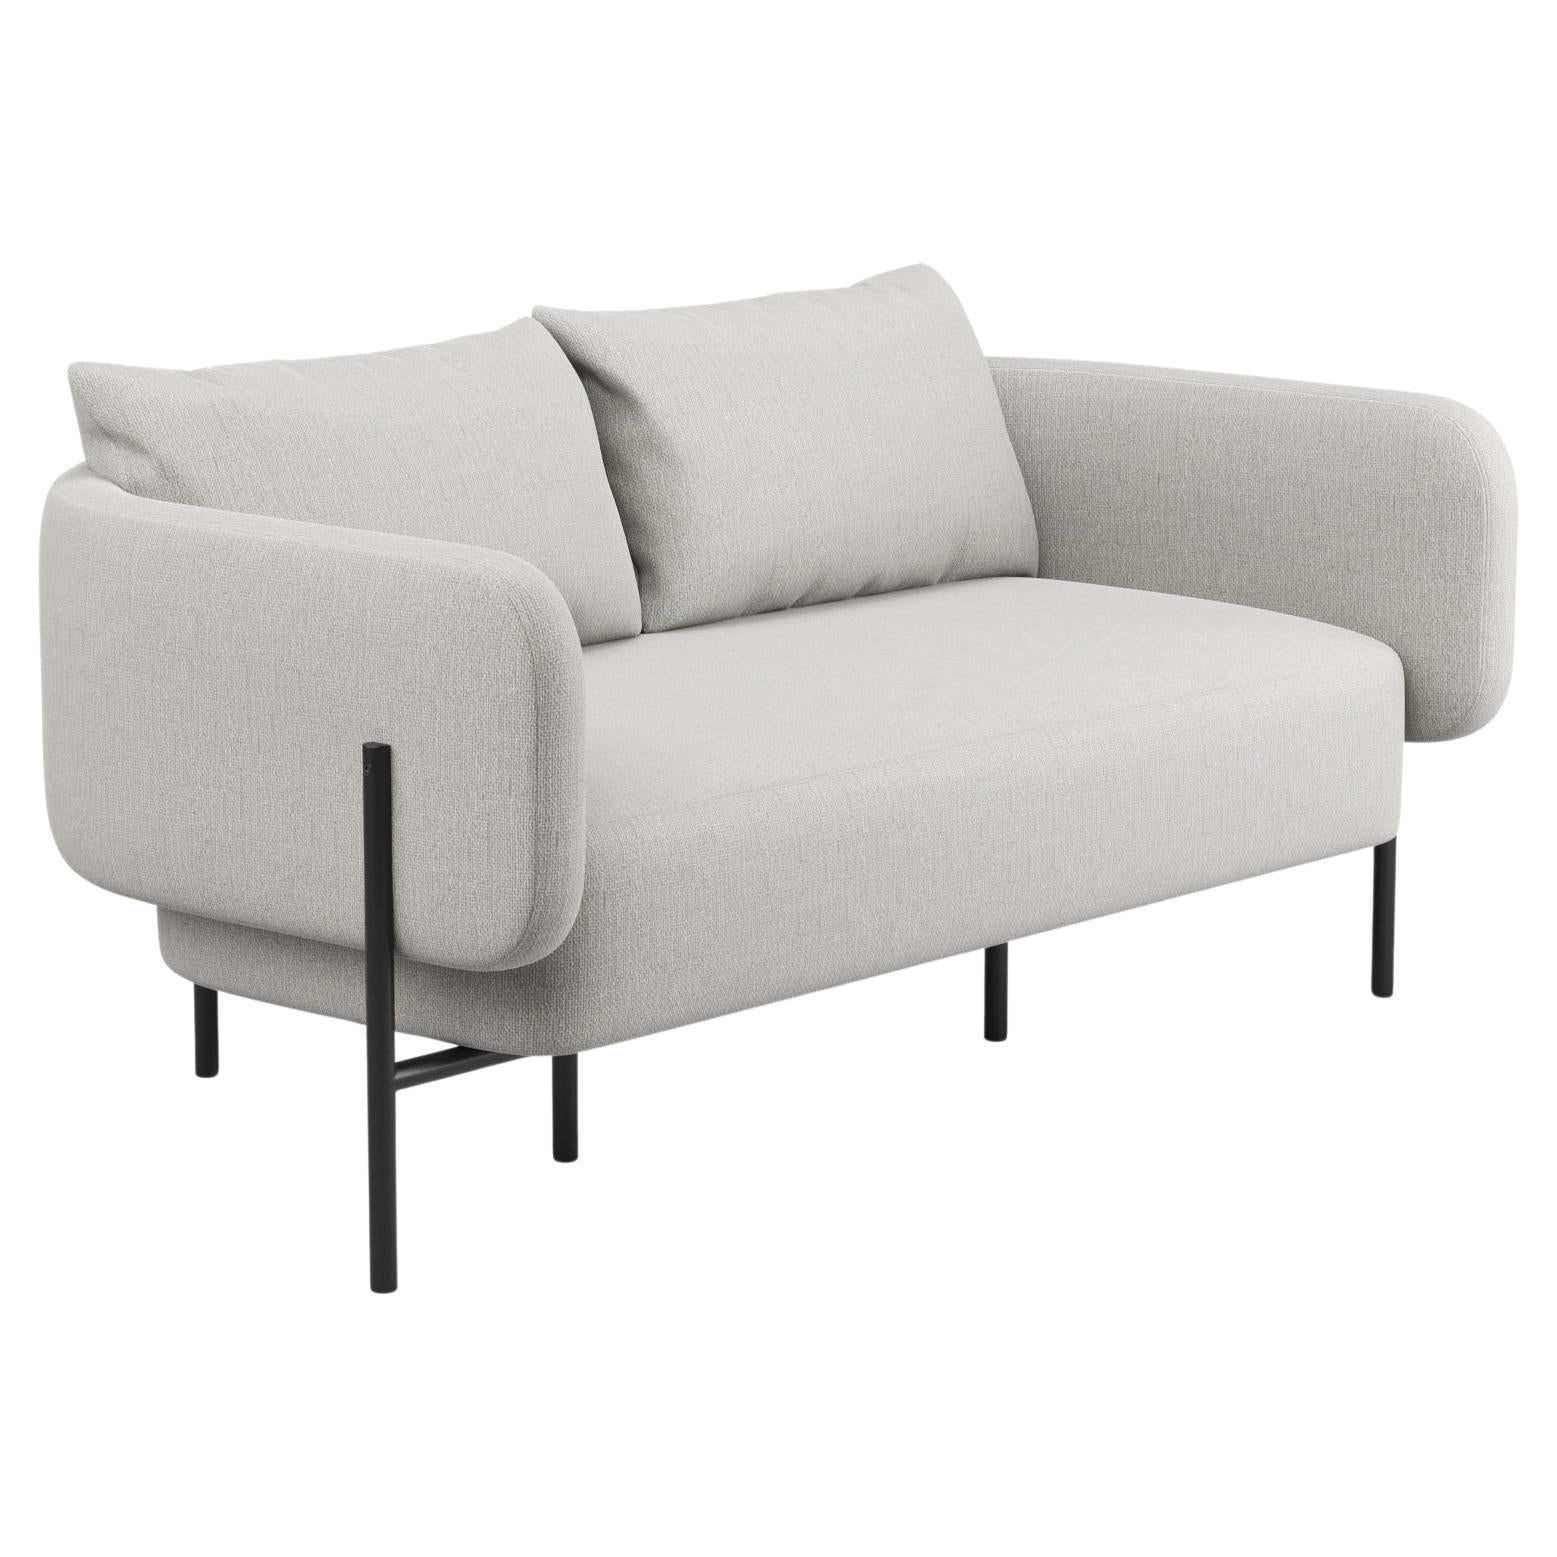 Hayche Abrazo 2 Seater Sofa - Gravel, UK, Made to Order For Sale